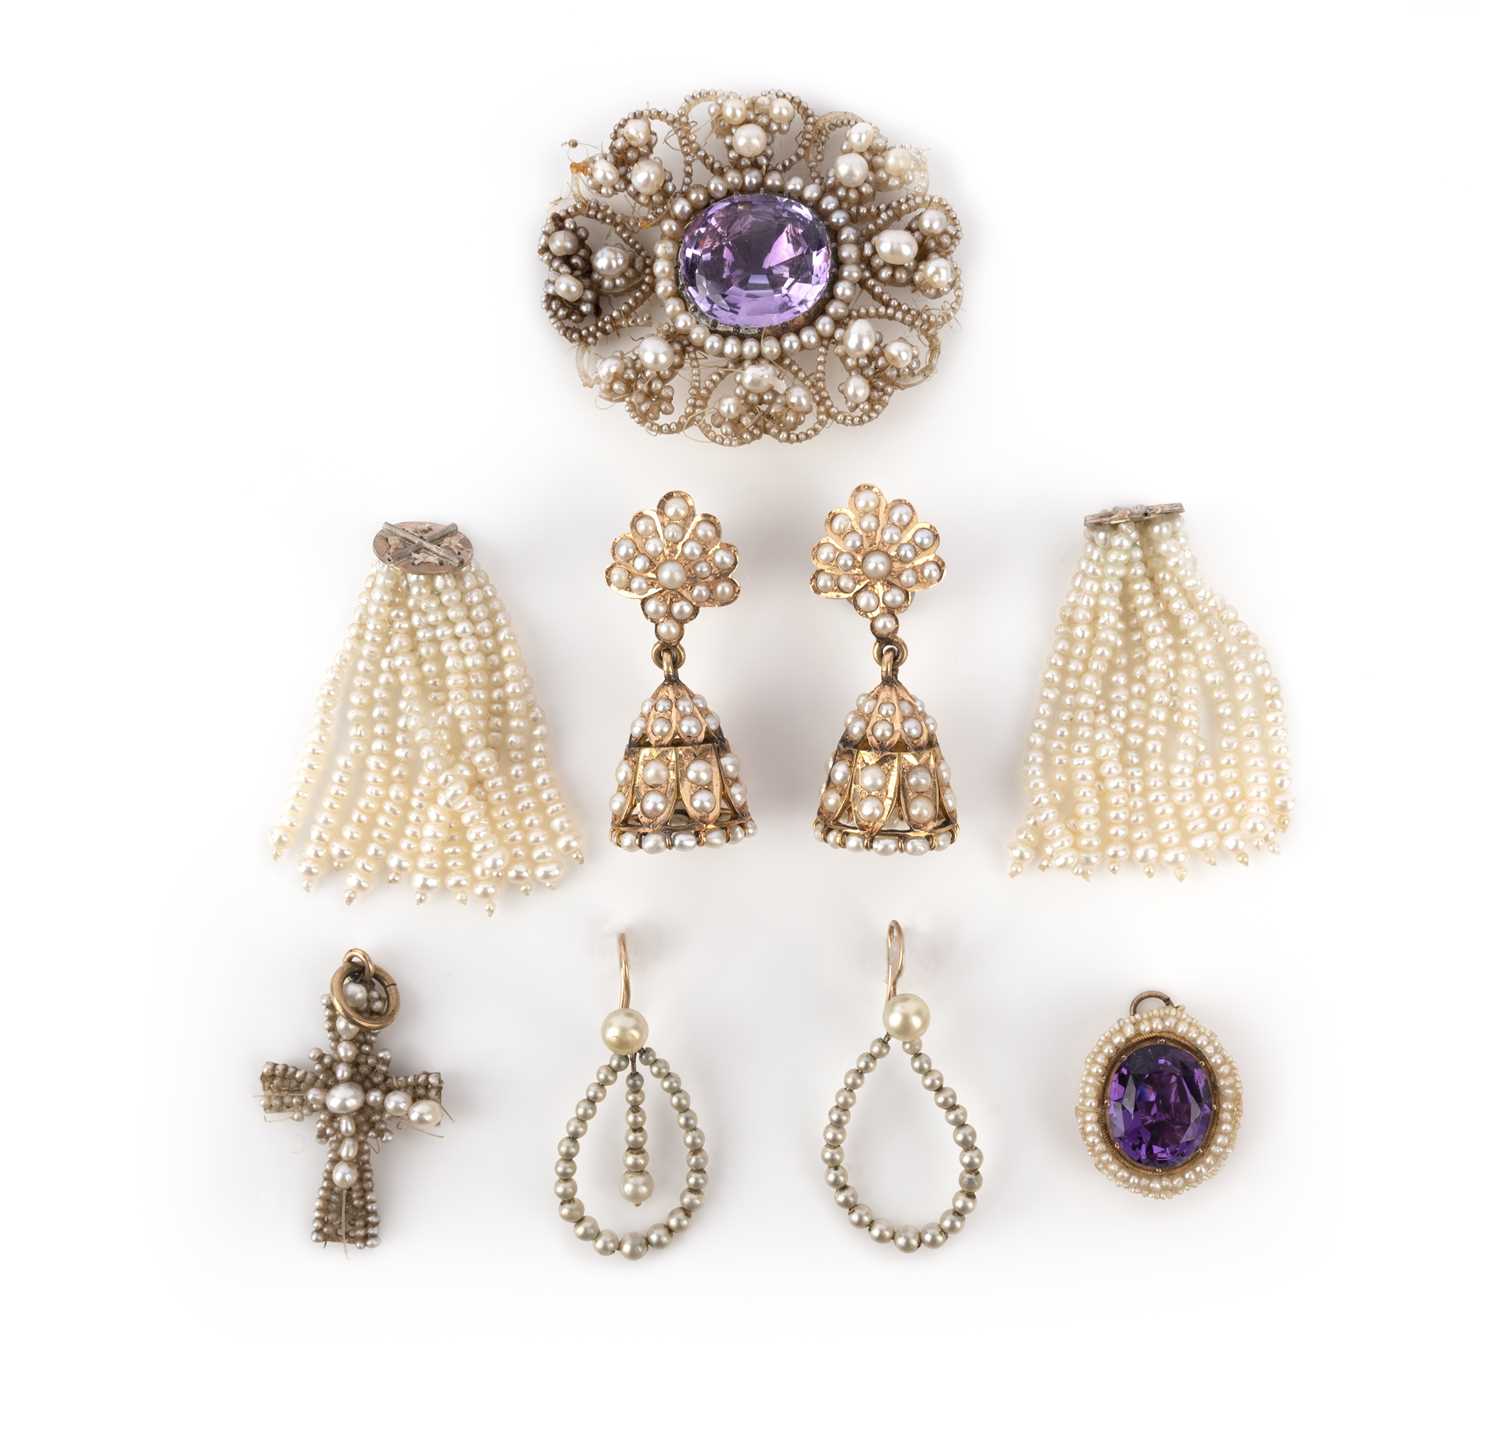 A group of seed pearl and amethyst jewels, 19th century, comprising: a brooch, set with a cushion-